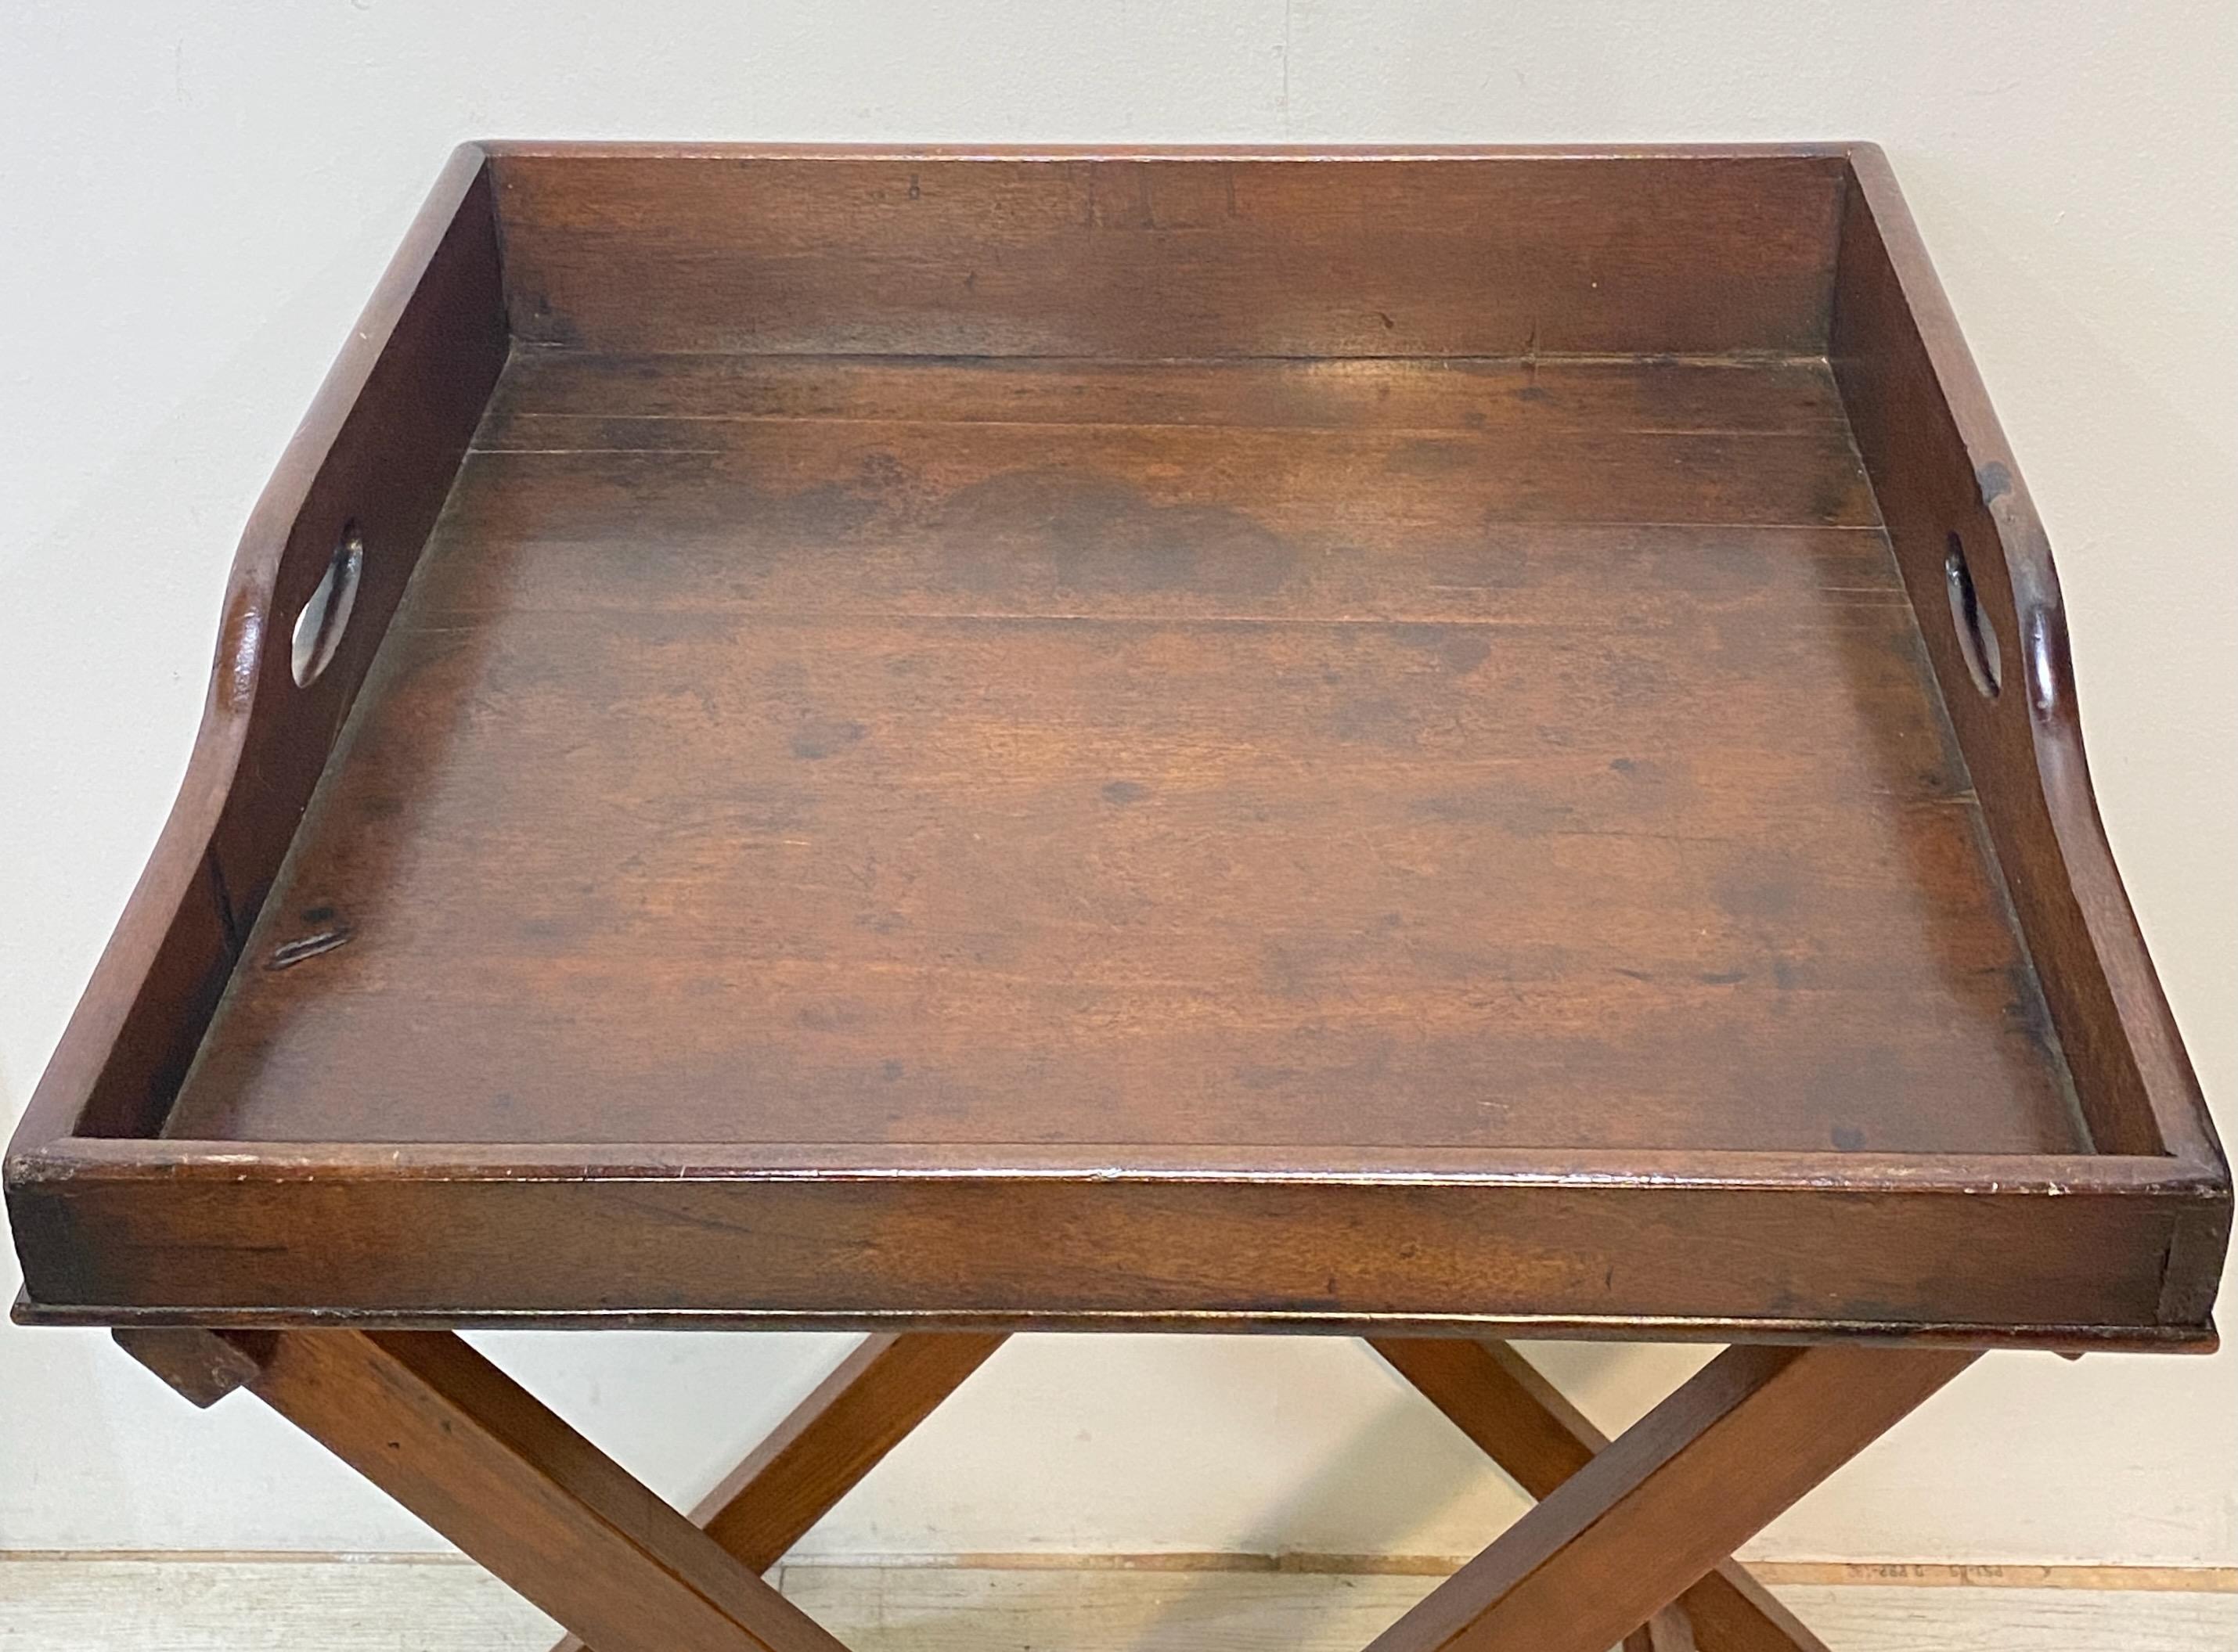 wooden butler stand with tray